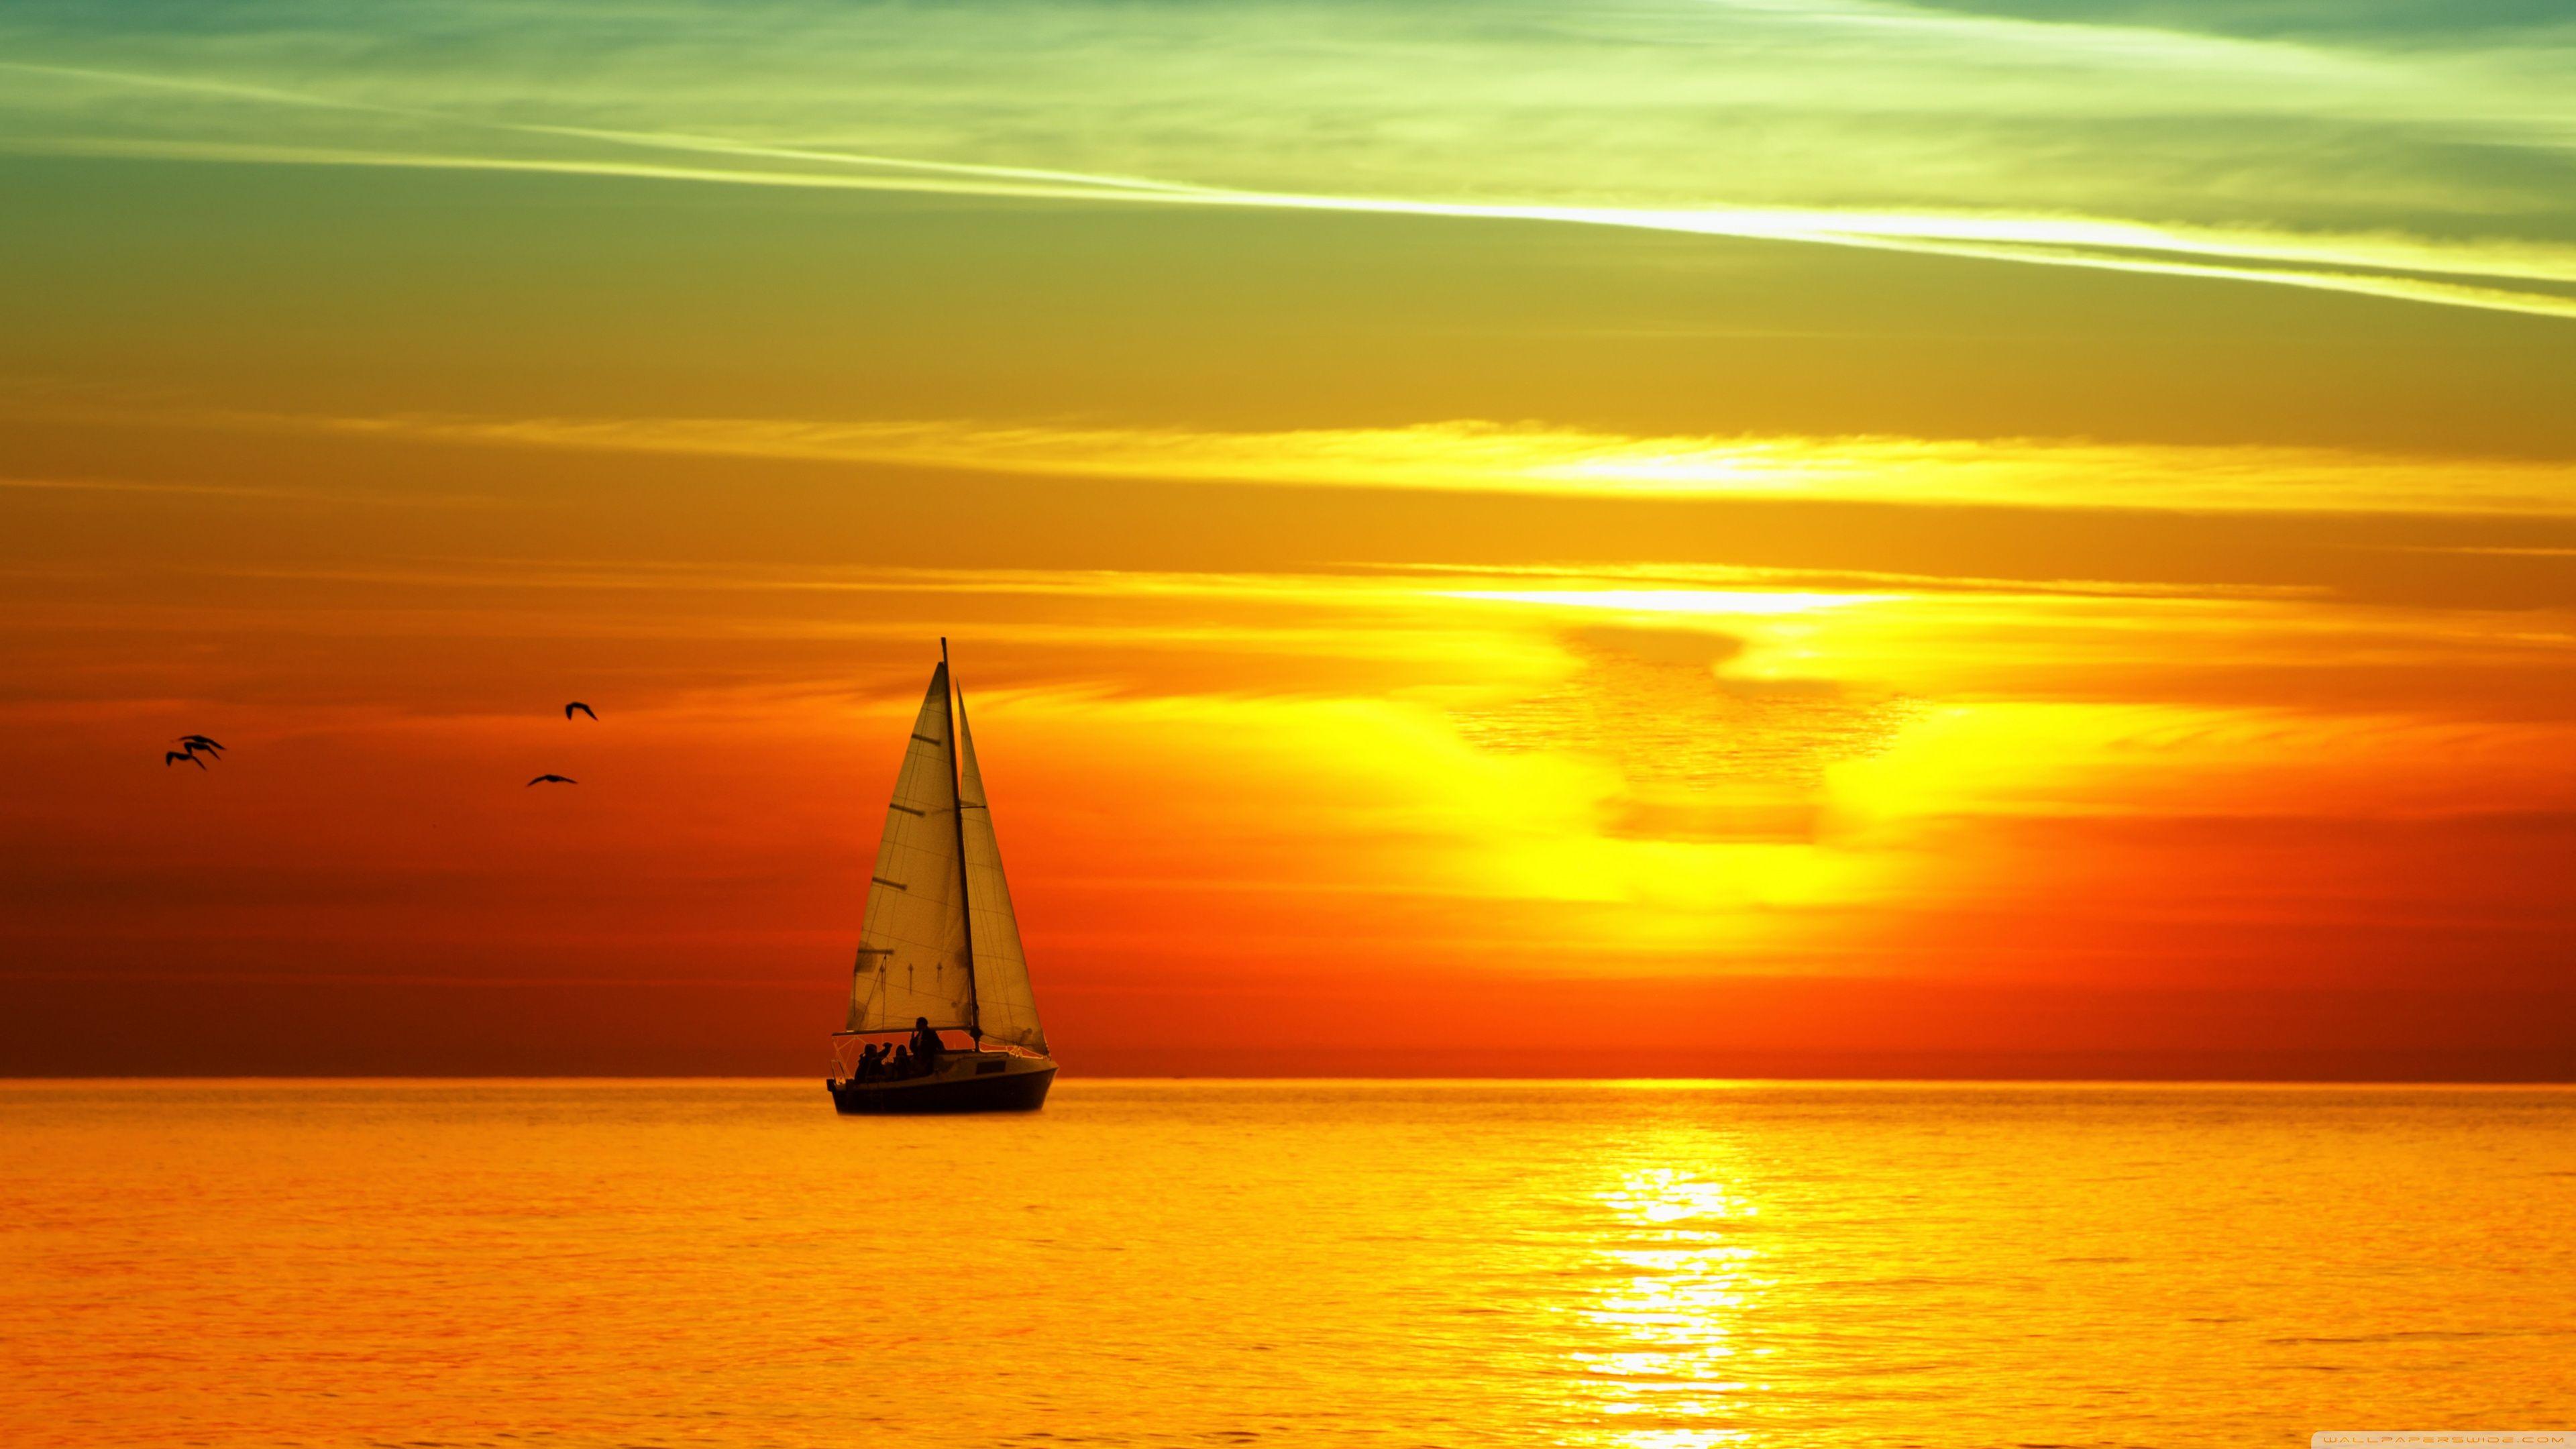 Sea Colorful Boat And Sunlight Wallpapers